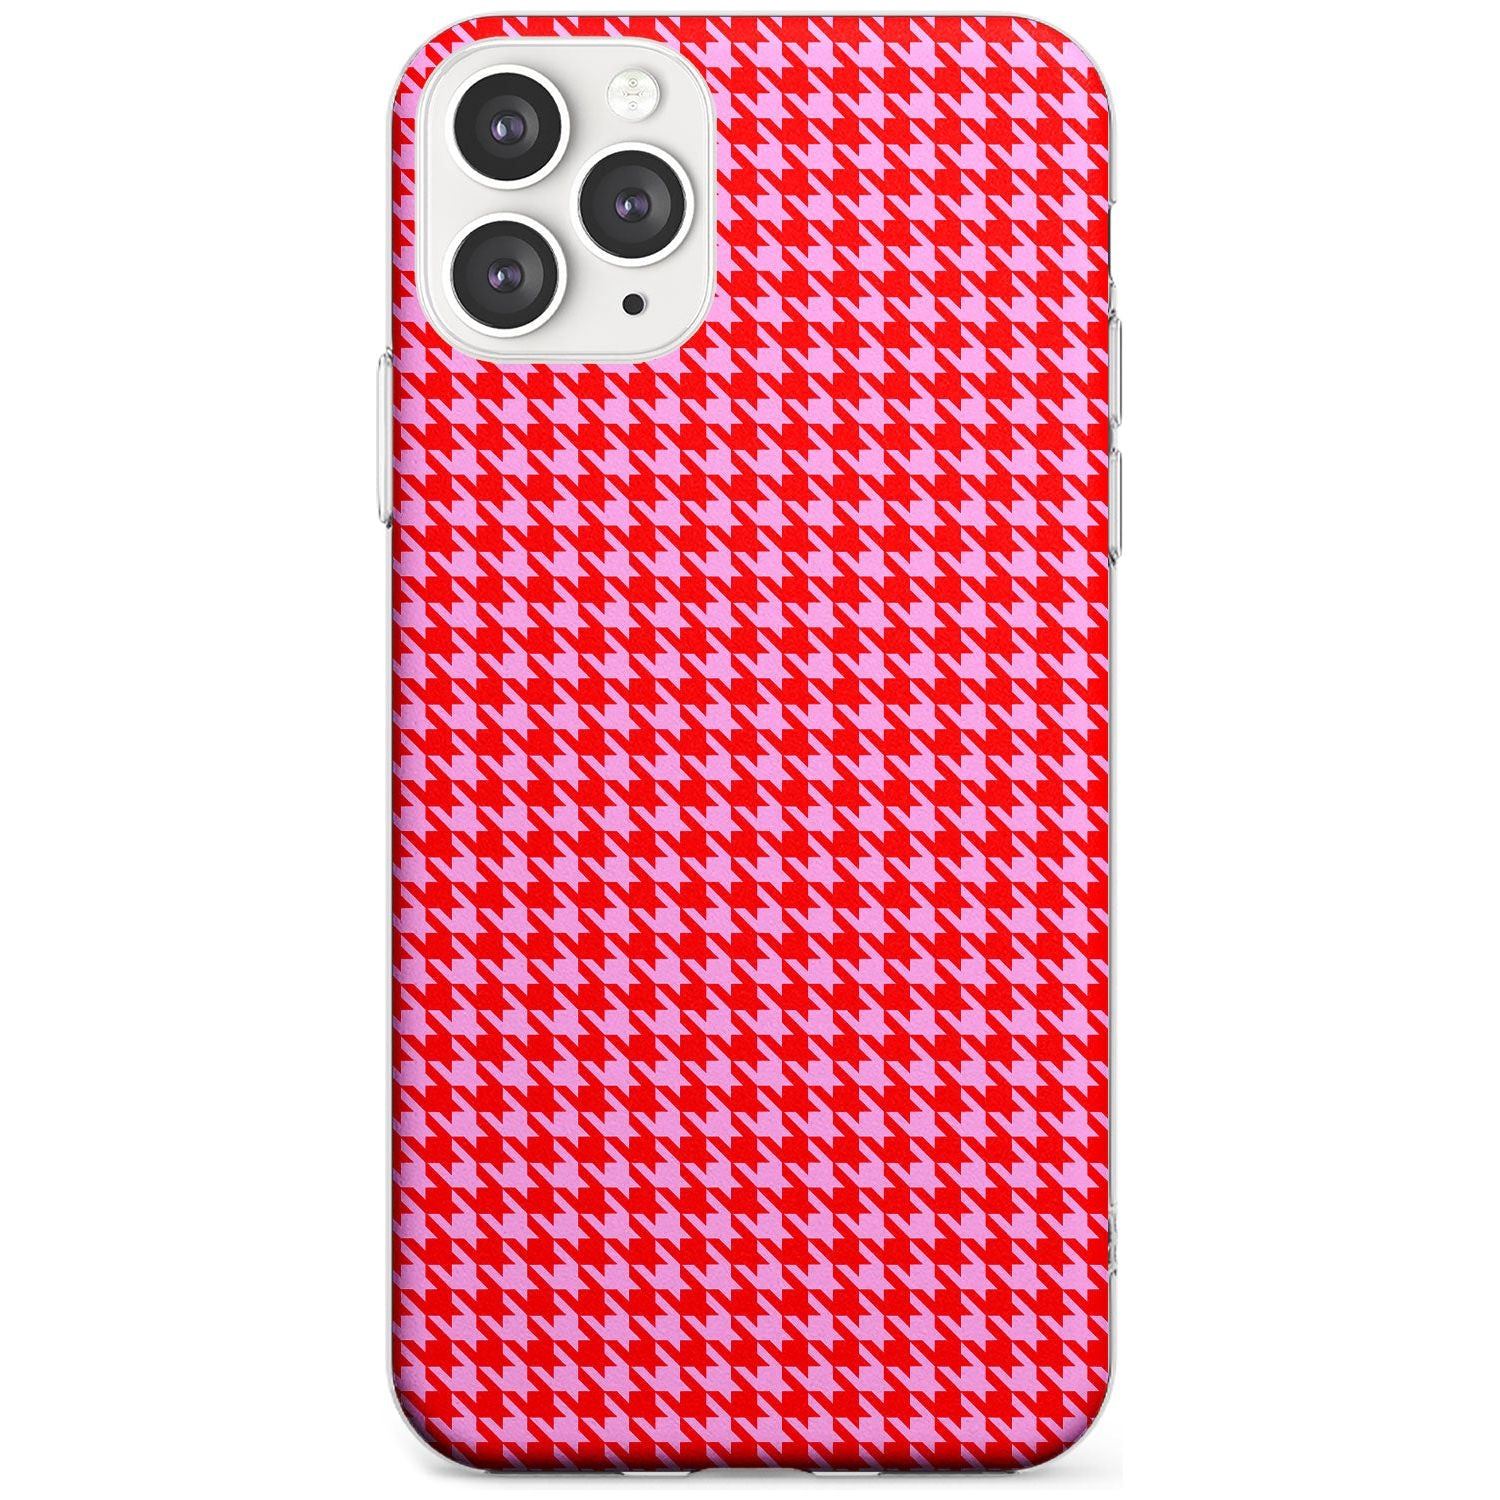 Neon Pink & Red Houndstooth Pattern Slim TPU Phone Case for iPhone 11 Pro Max